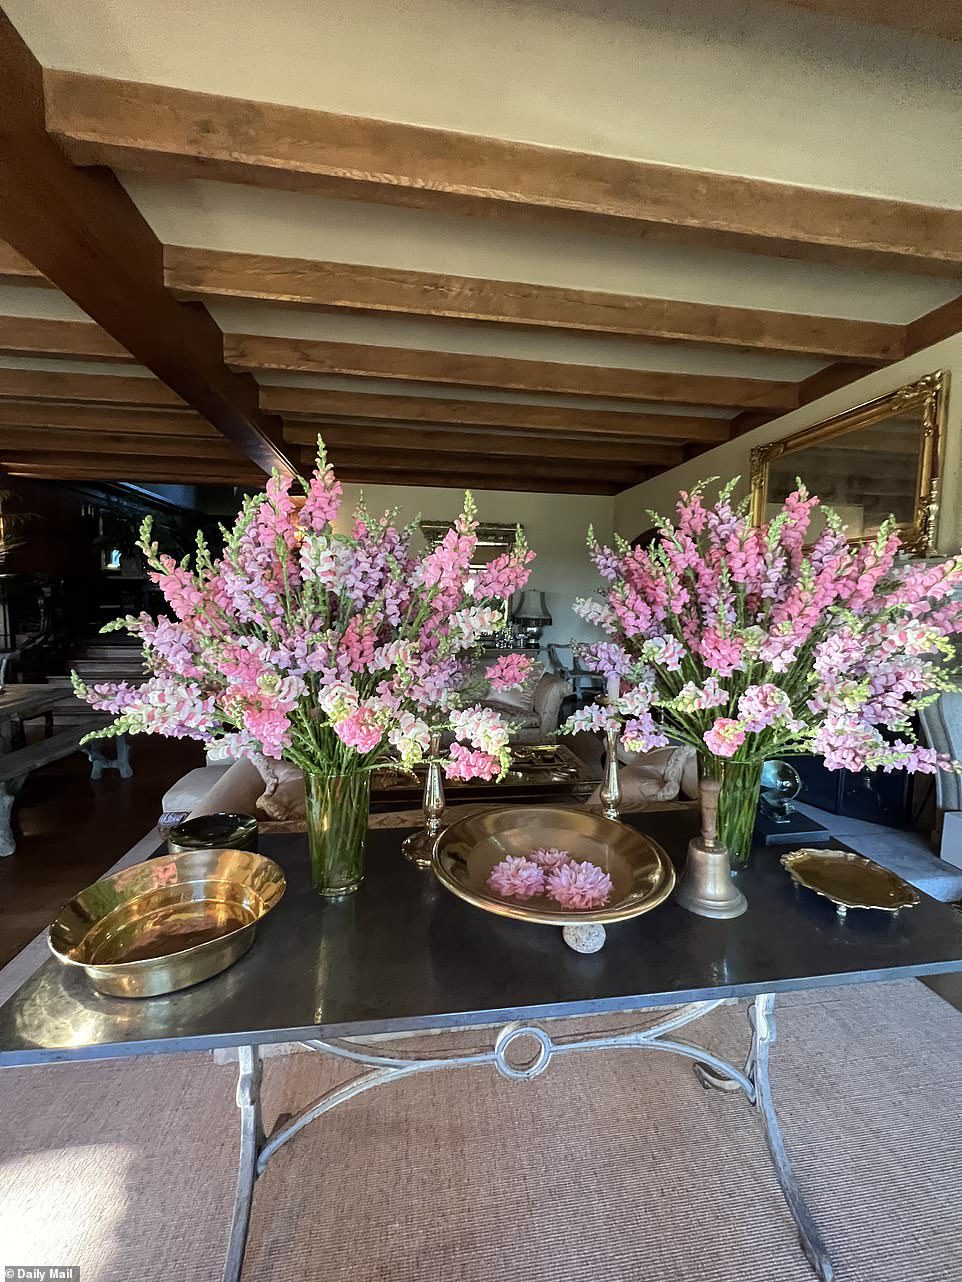 Sheek: The table setting was so pretty around her house